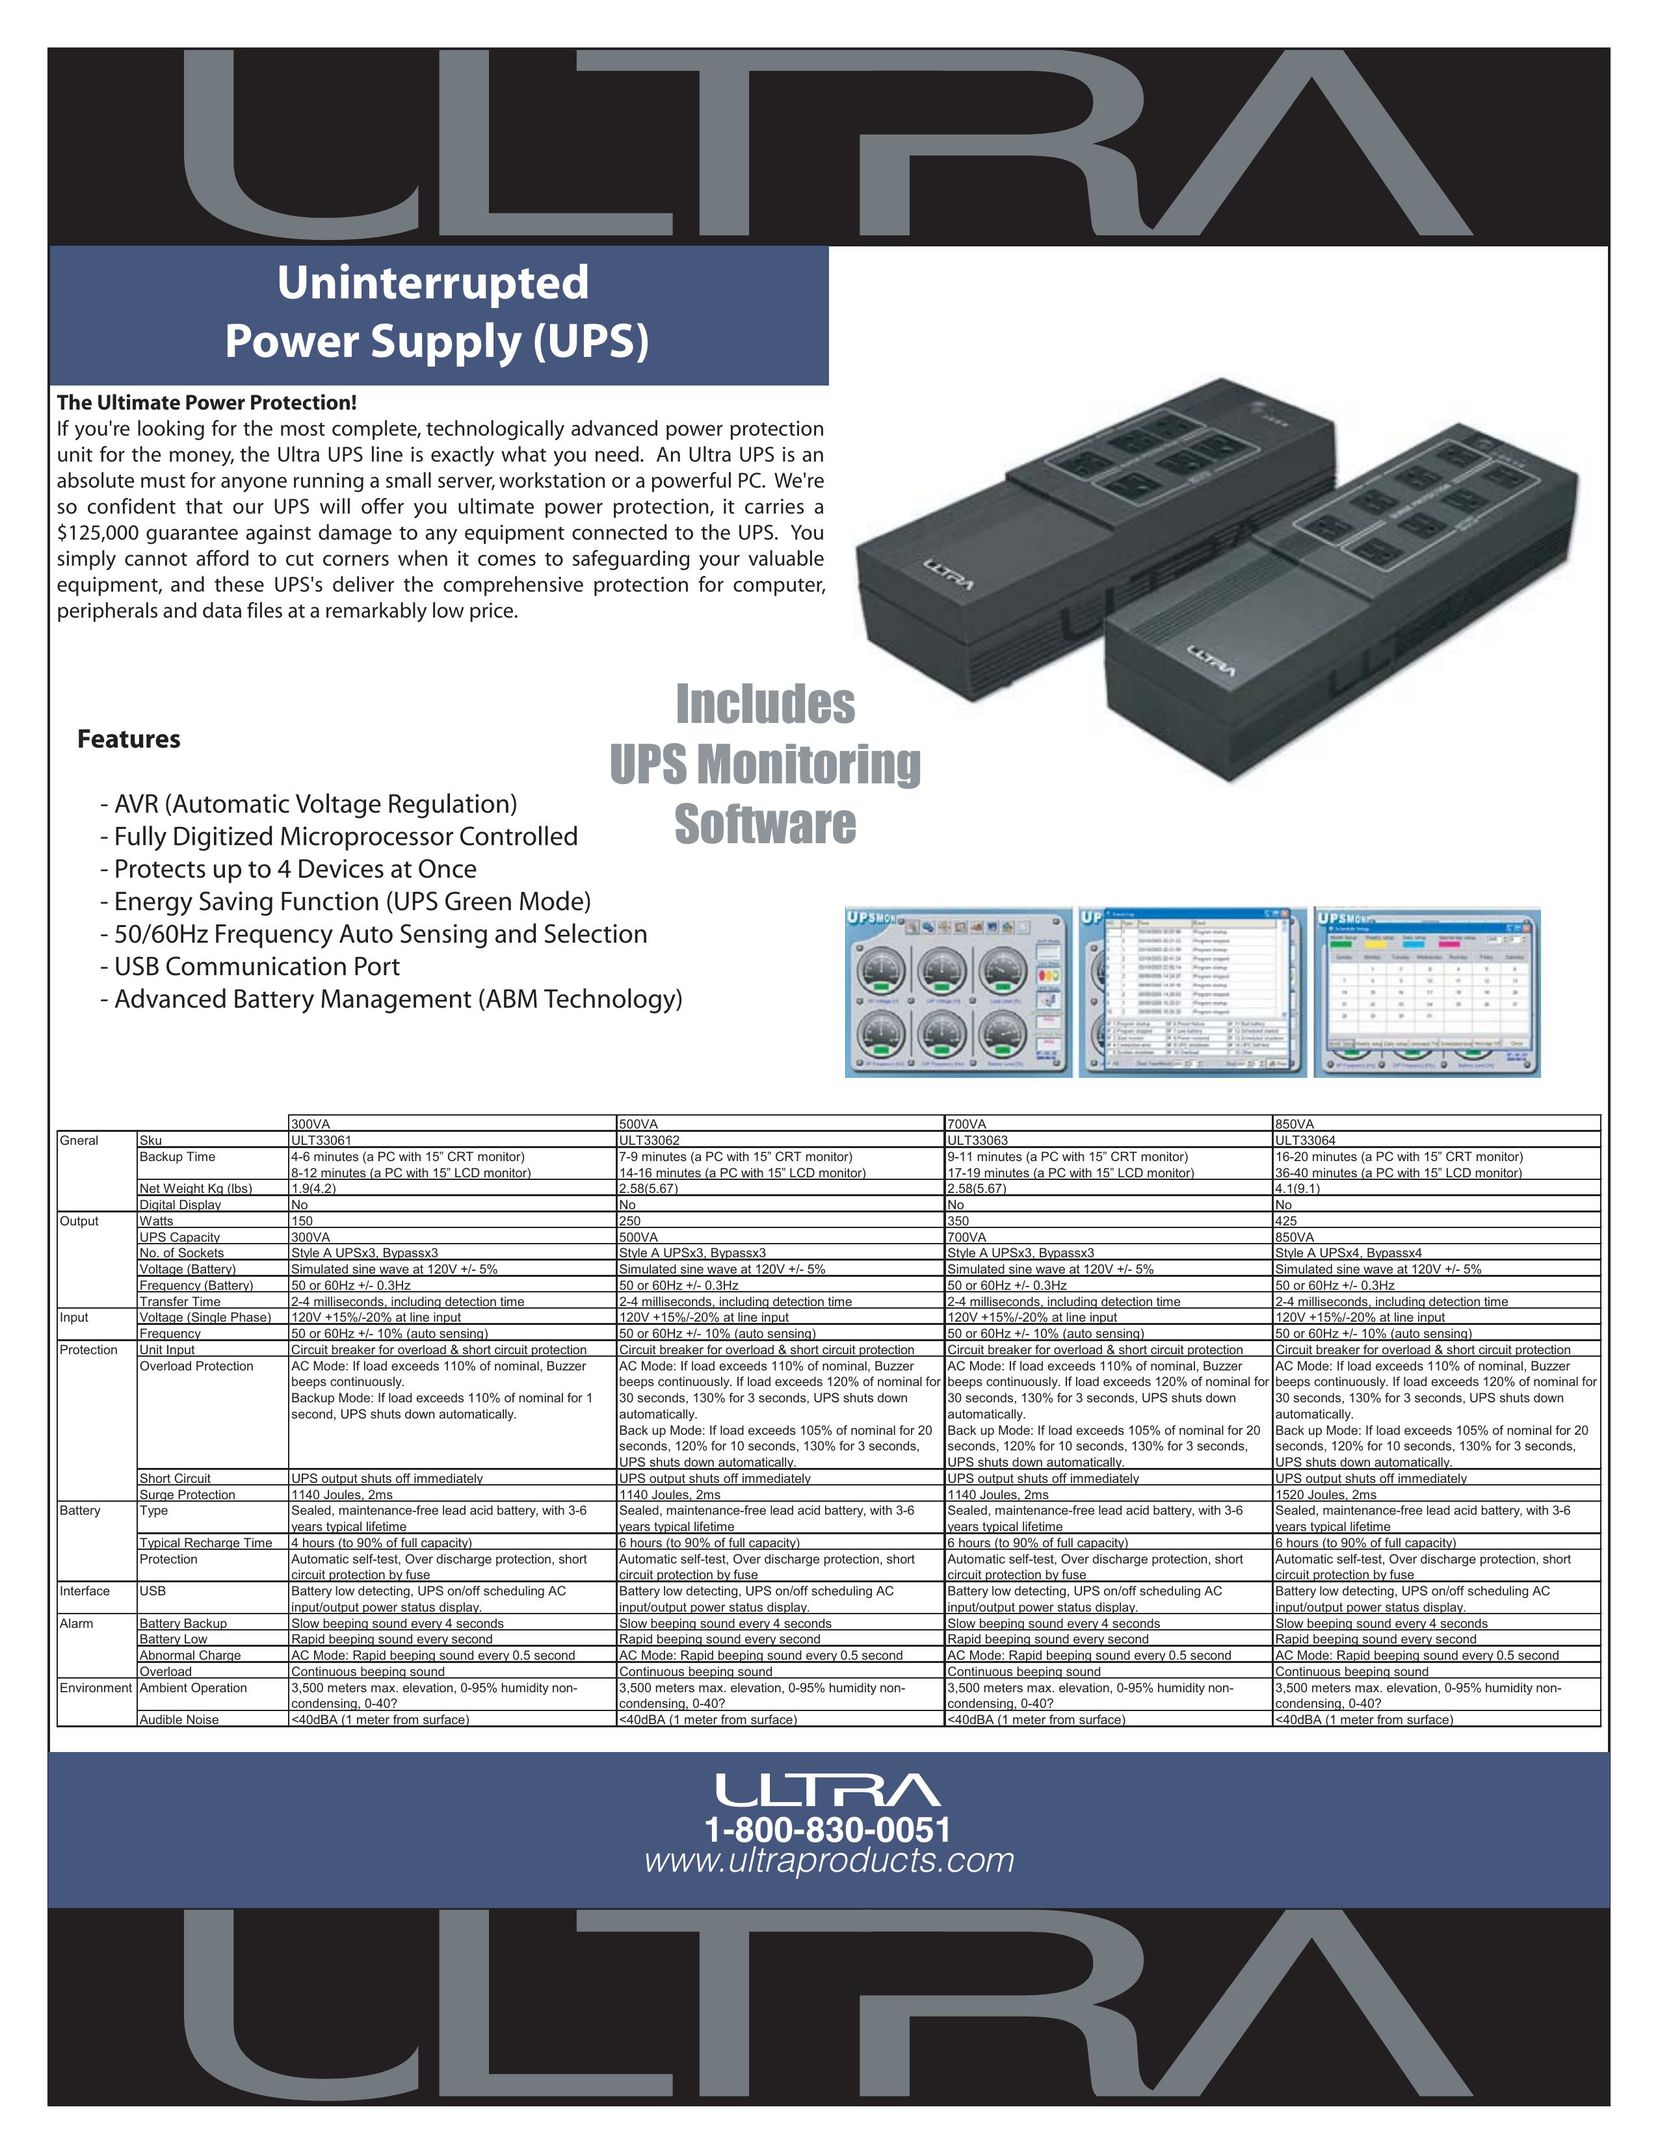 Ultra Products ULT33063 Power Supply User Manual